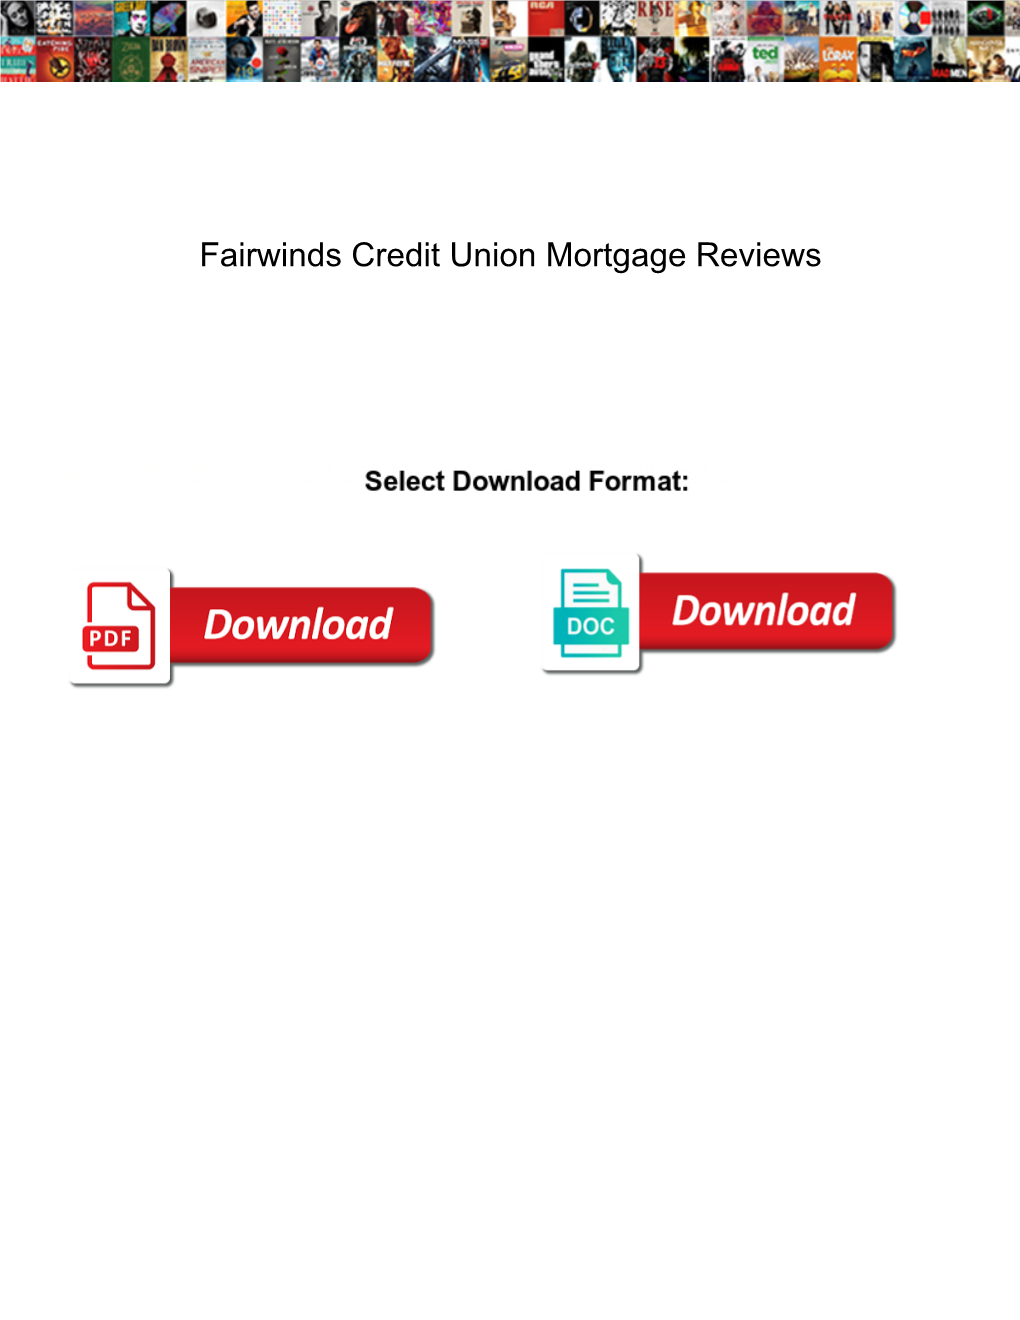 Fairwinds Credit Union Mortgage Reviews